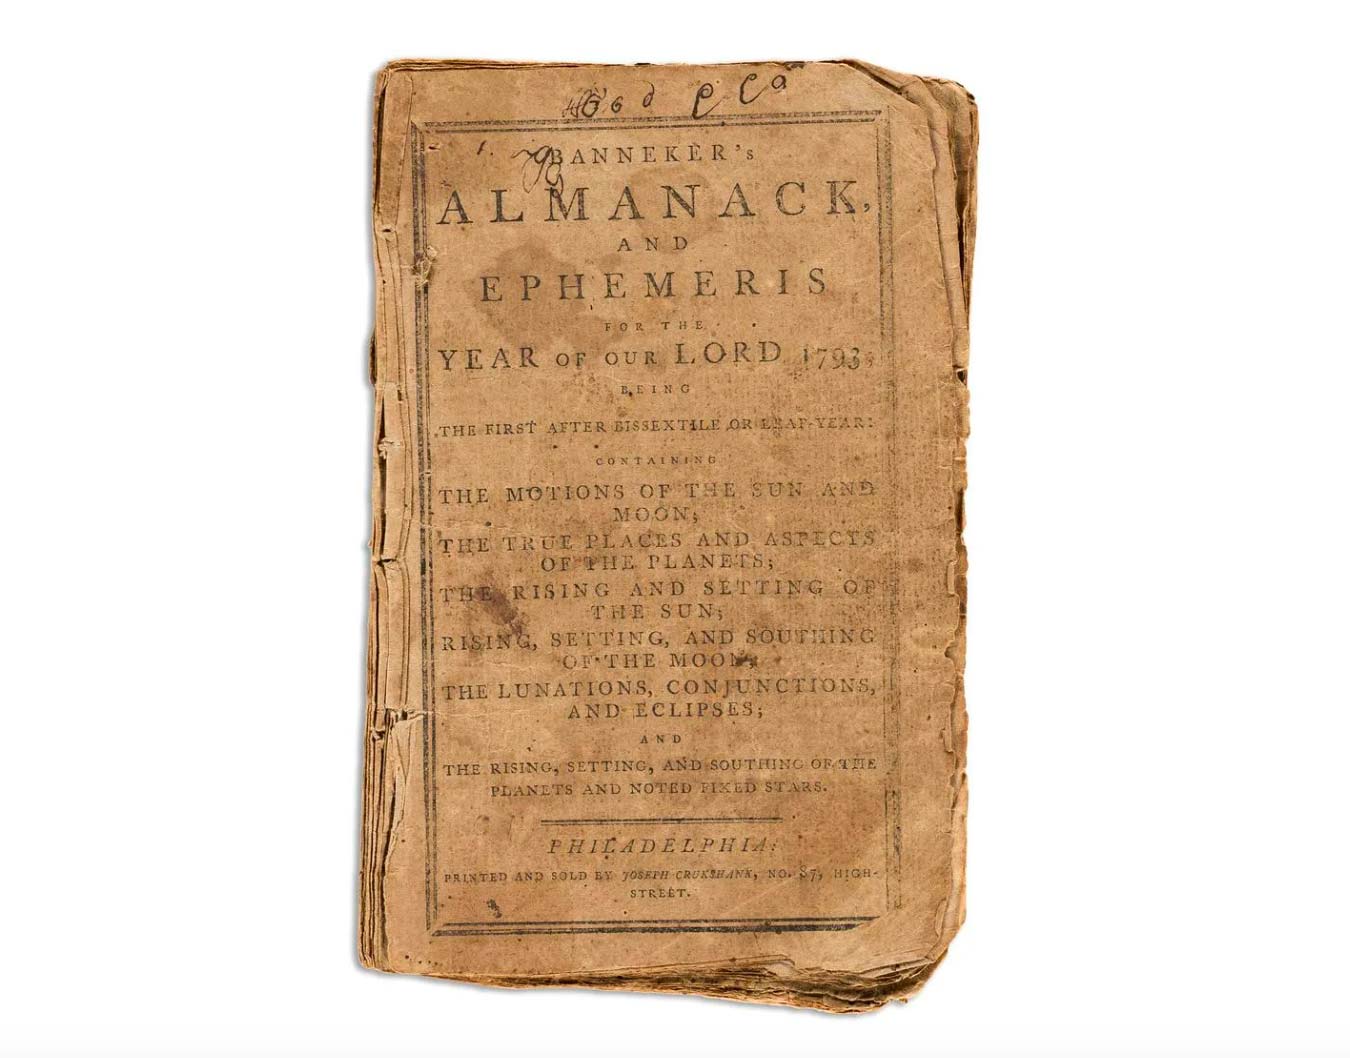 Benjamin Banneker, 'Banneker's Almanack, and Ephemeris for the Year of our Lord, 1793,' $12,000-$18,000. Image courtesy Swann's Auction Galleries